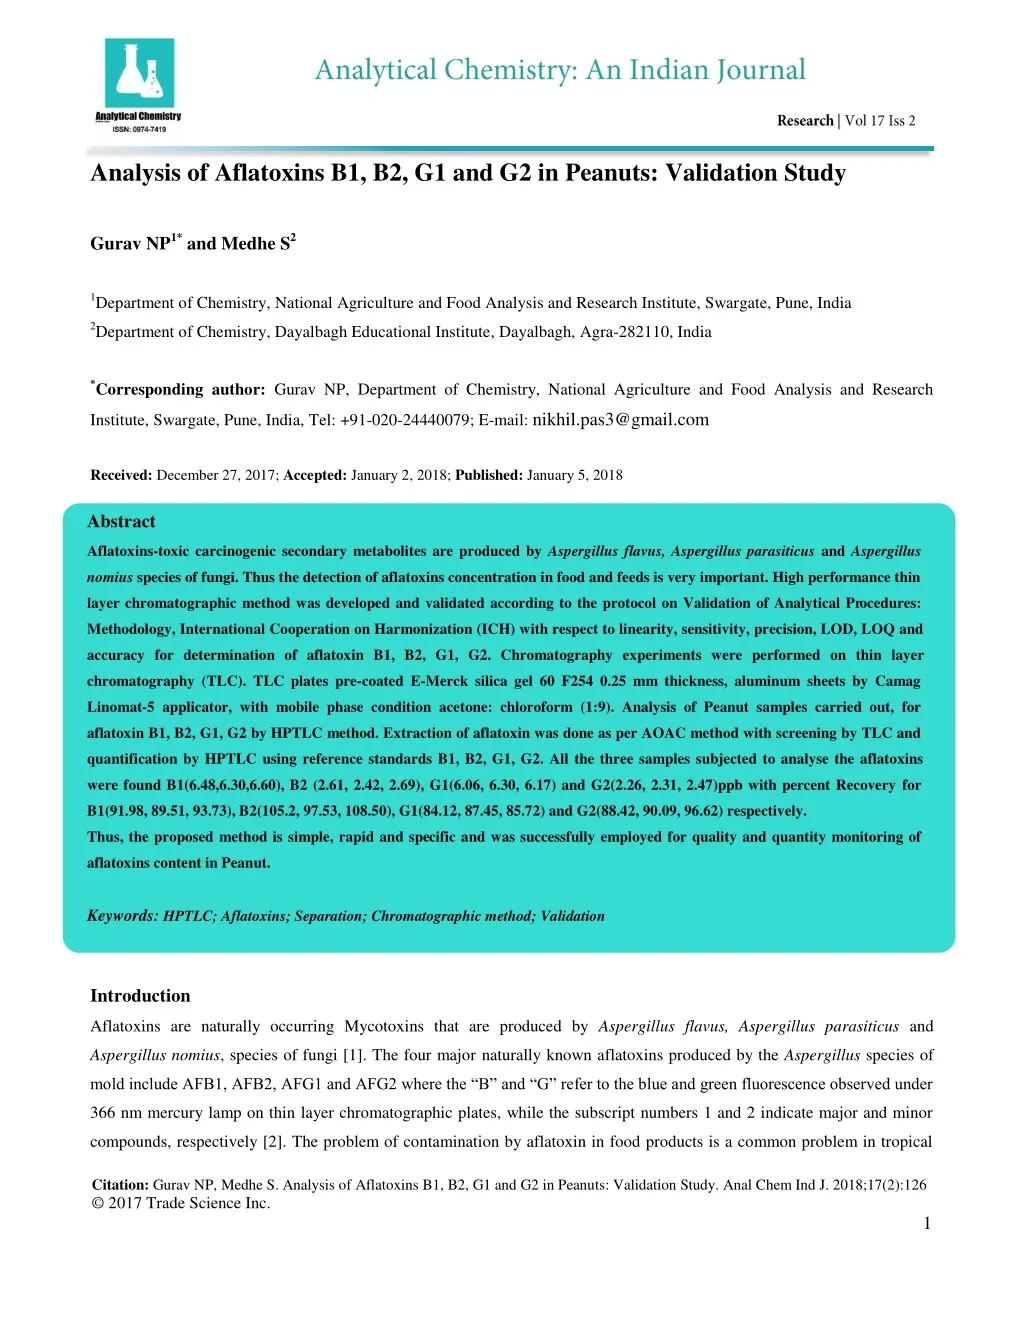 analysis of aflatoxins b1 b2 g1 and g2 in peanuts